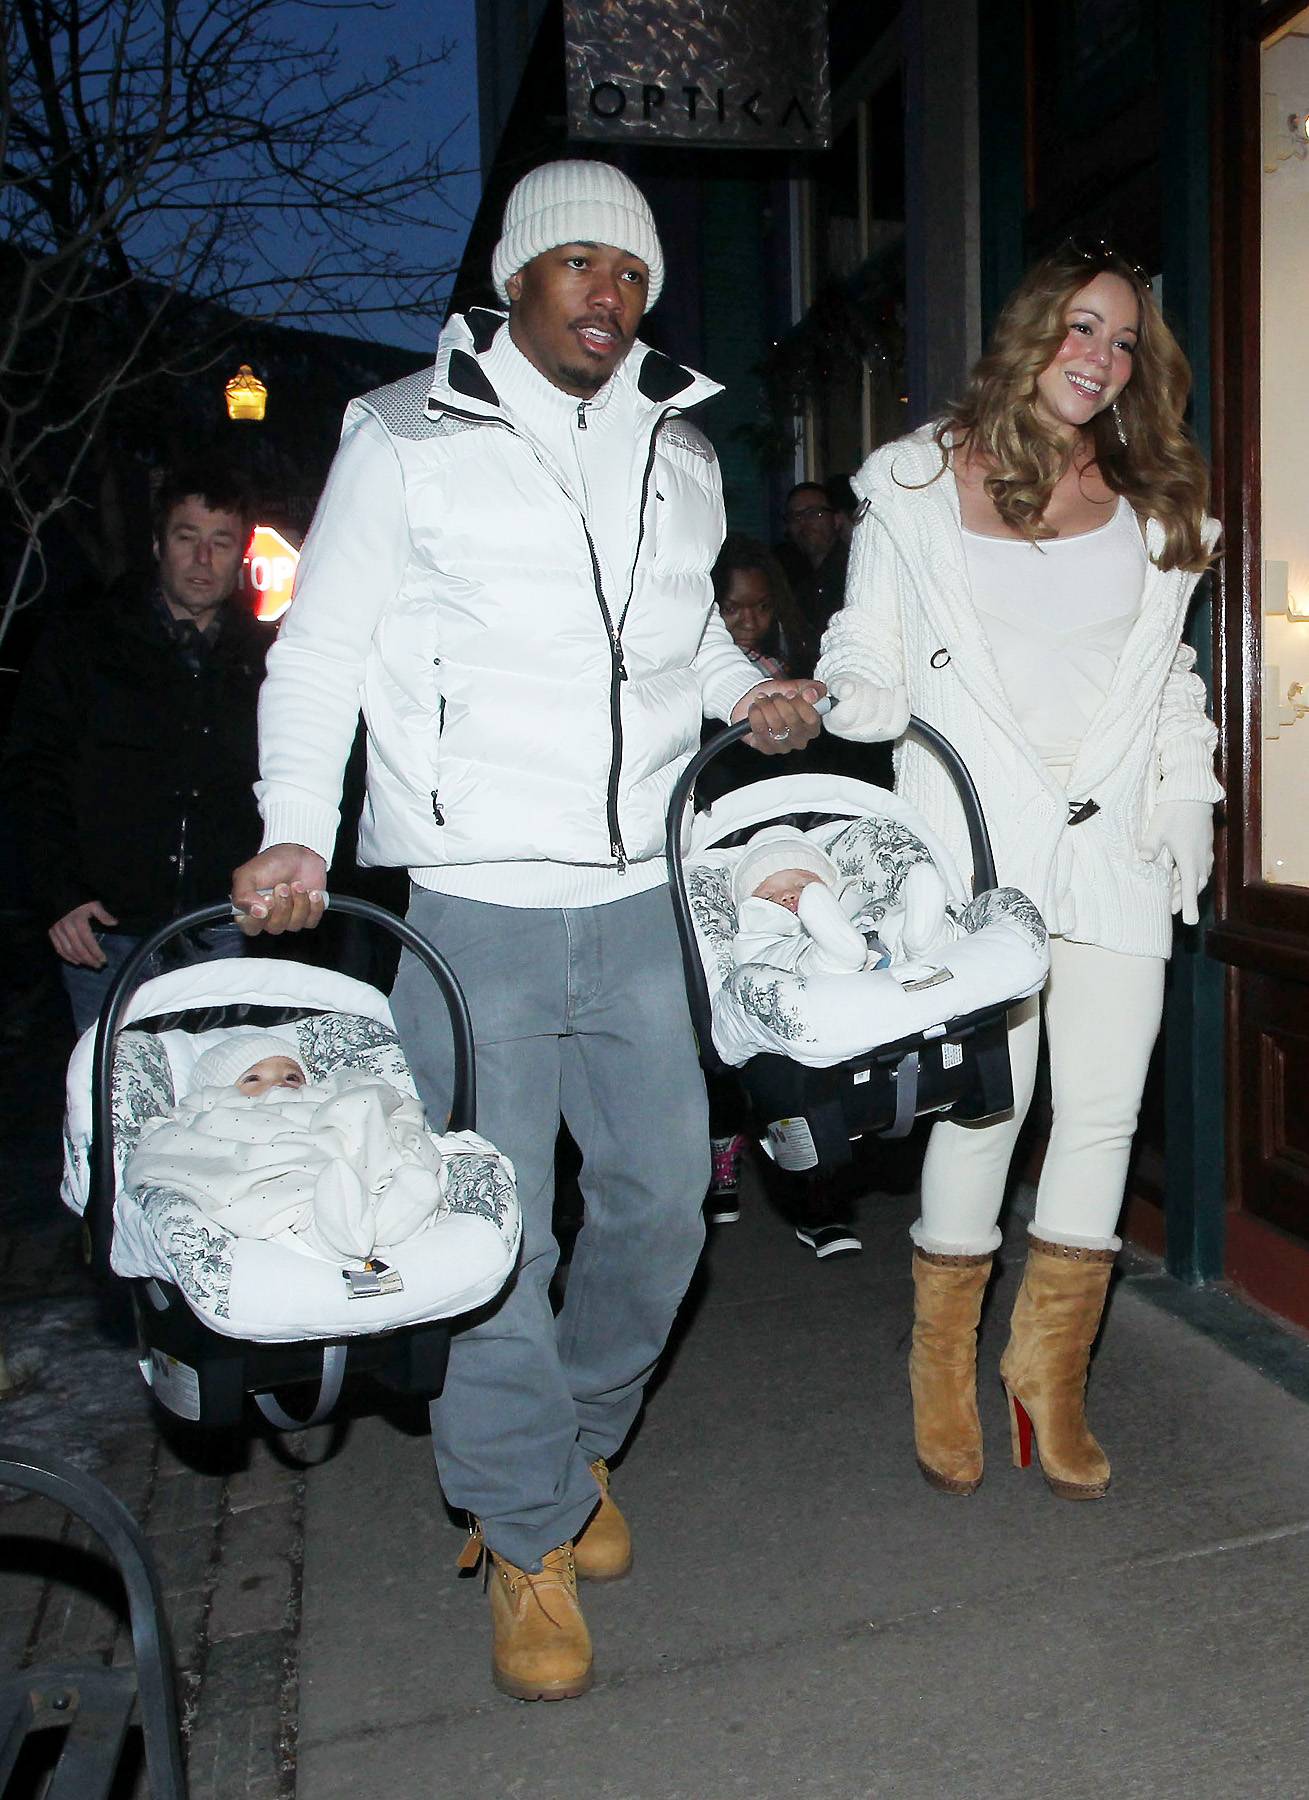 Mariah Carey - Last Mother's Day, Mariah and her hubby Nick Cannon were brand new parents to twins Morrocan and Monroe. One year later, they've got diaper duty on lock and have traveled with their twins everywhere from Aspen to Paris. Like their wedding anniversary, we're sure this fab foursome will be celebrating Mom's day in style.&nbsp;(Photo: FameFlynet, Inc.)